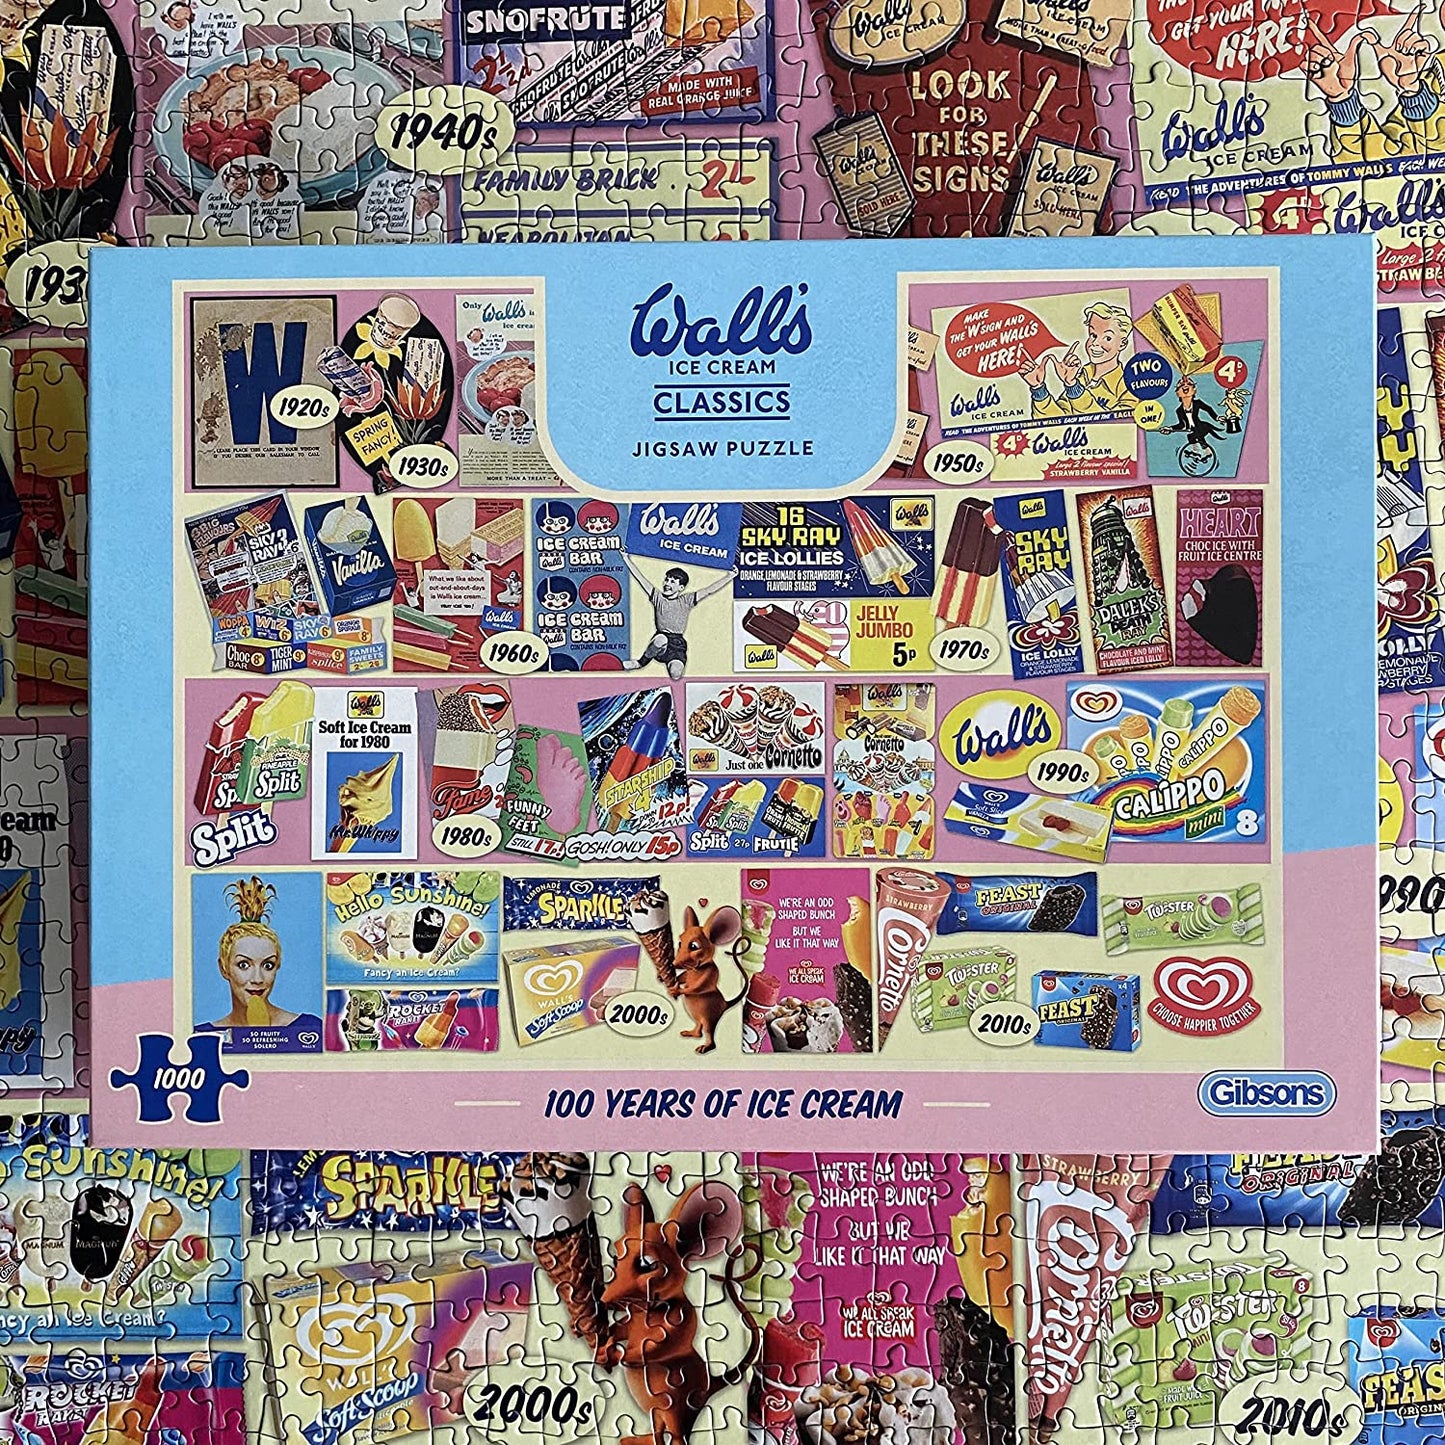 Gibsons - 100 Years of Wall's Ice Cream - 1000 Piece Jigsaw Puzzle